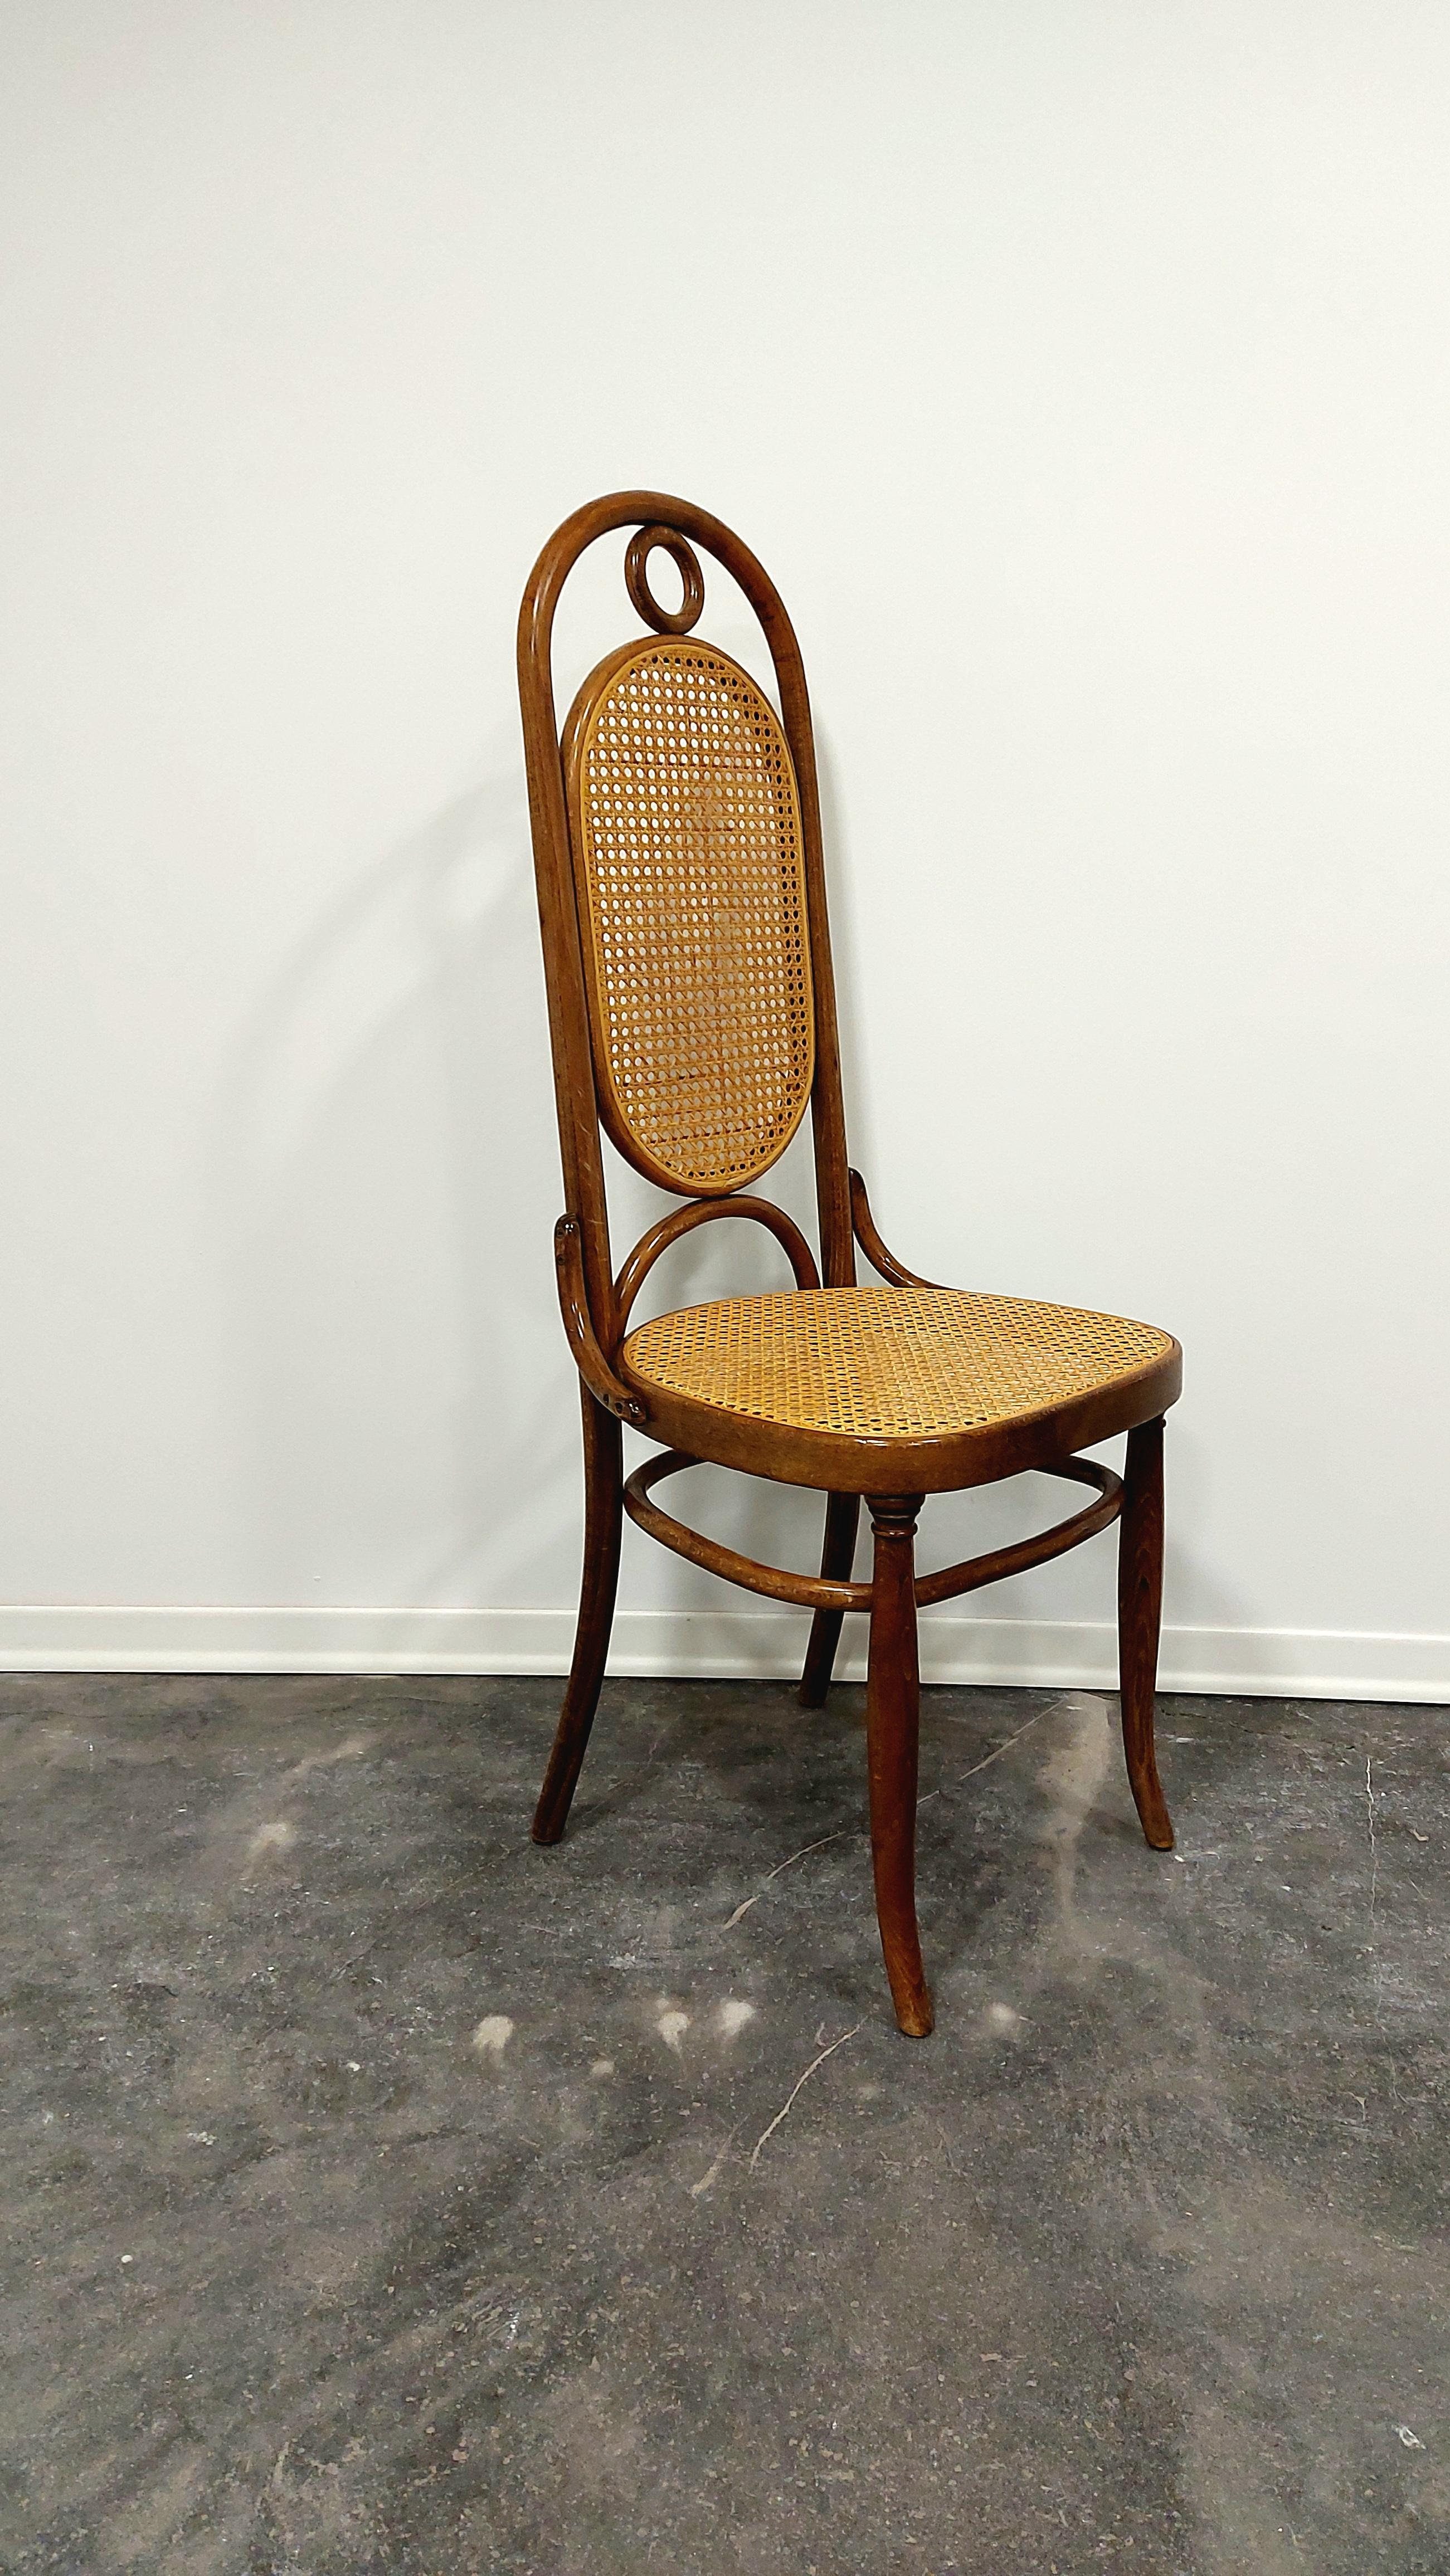 Slovenian Dining Chairs, Bentwood, M 17, High Back, 1 of 6 For Sale